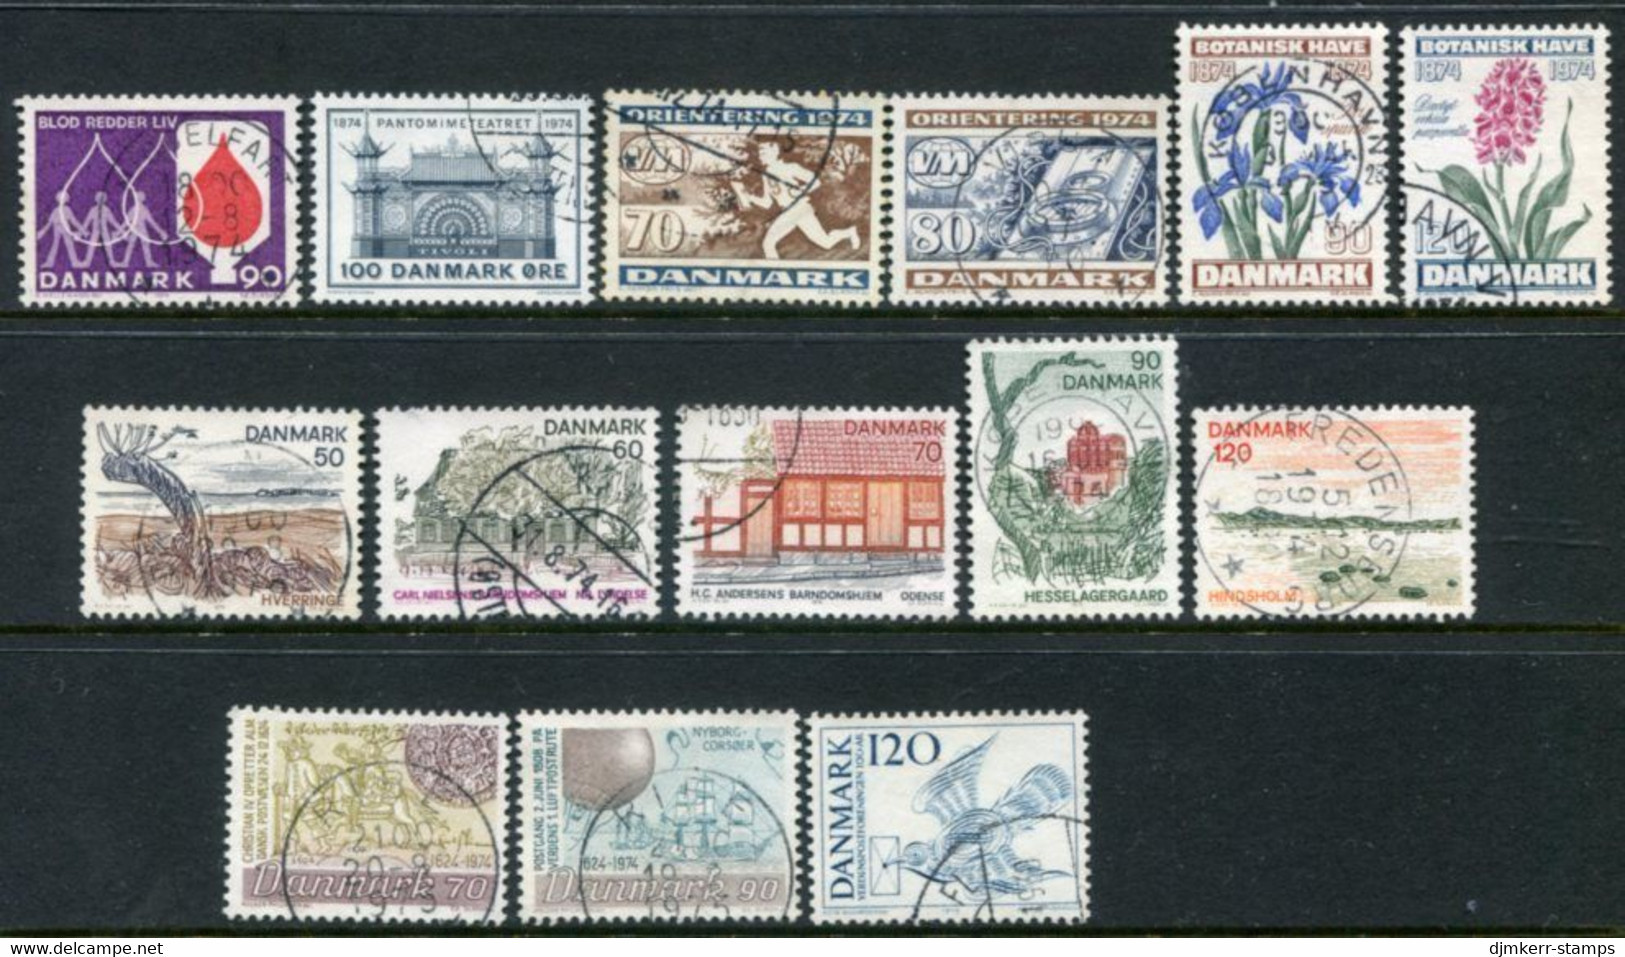 DENMARK 1974 Complete Commemorative Issues  Used. Between Michel 555-79 - Usado